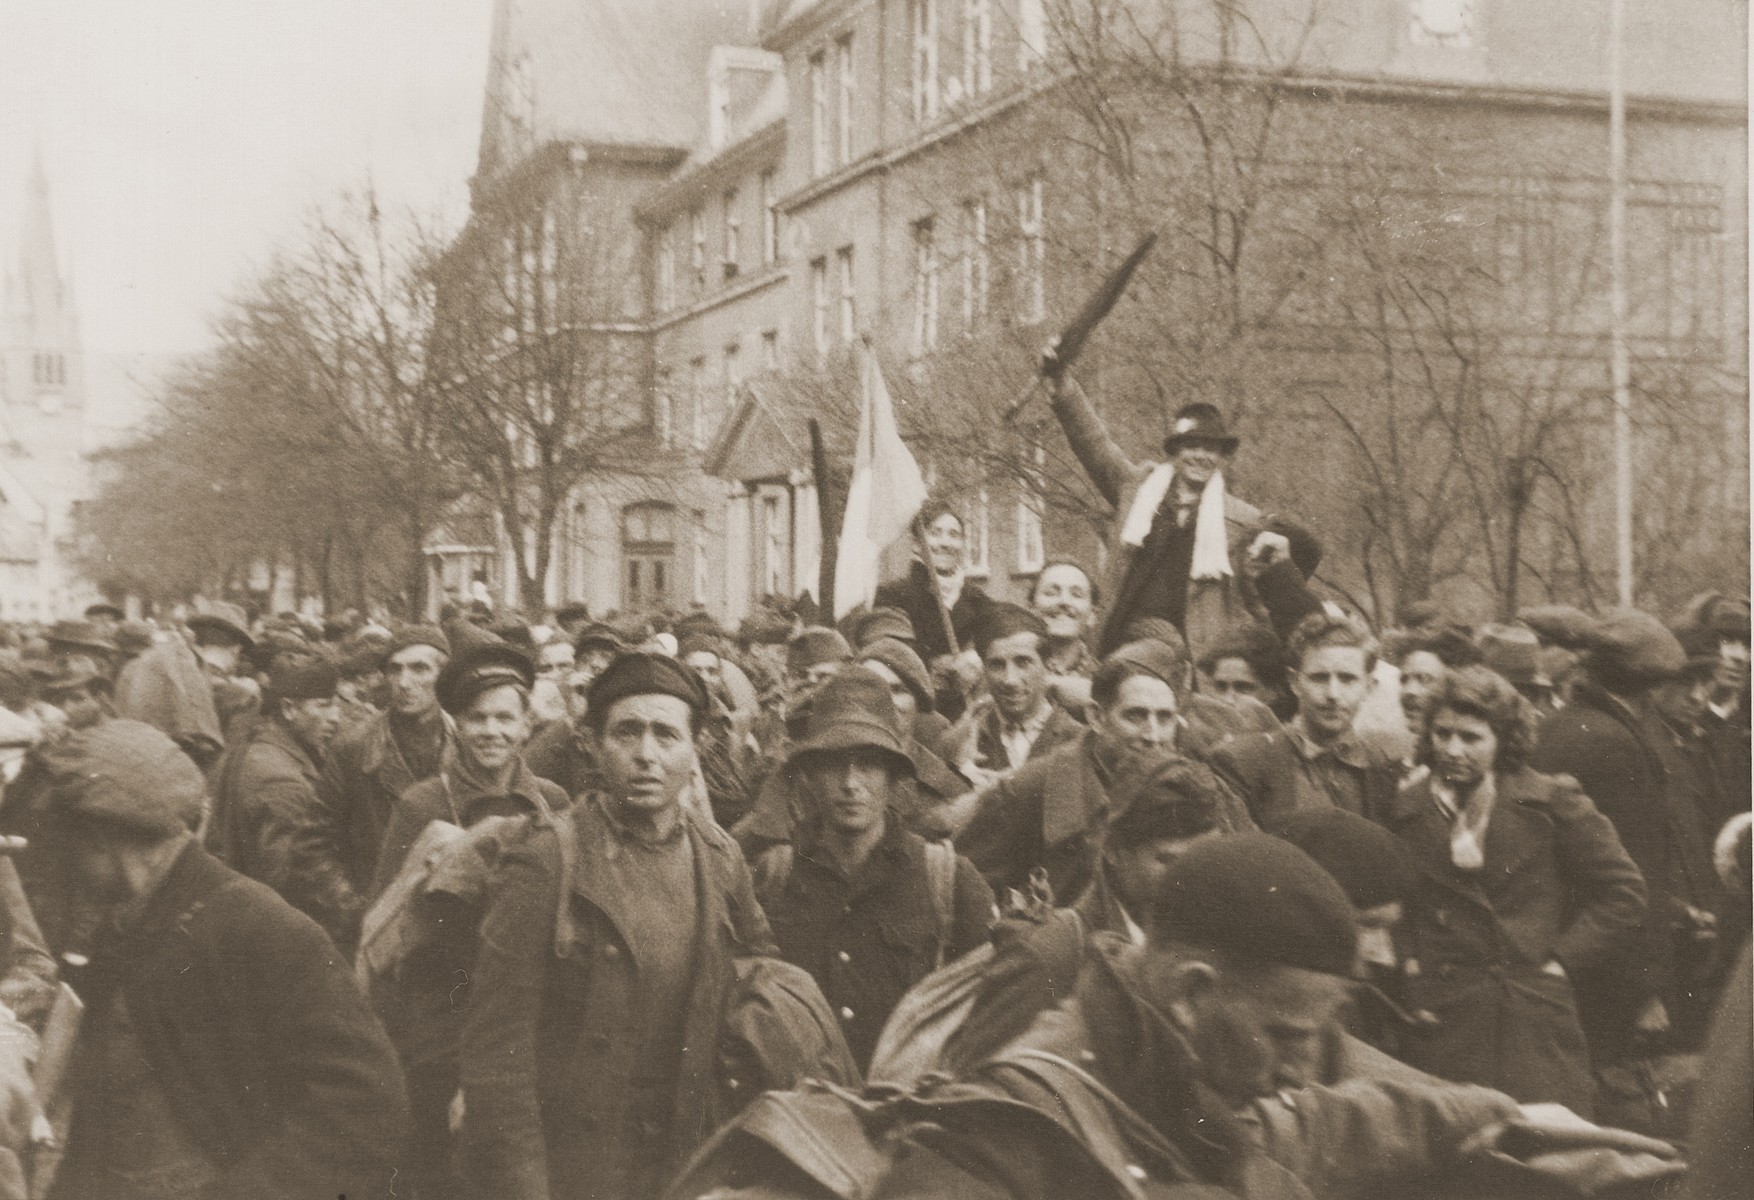 Displaced persons in Dillenburg after the liberation of the area by U.S. troops.